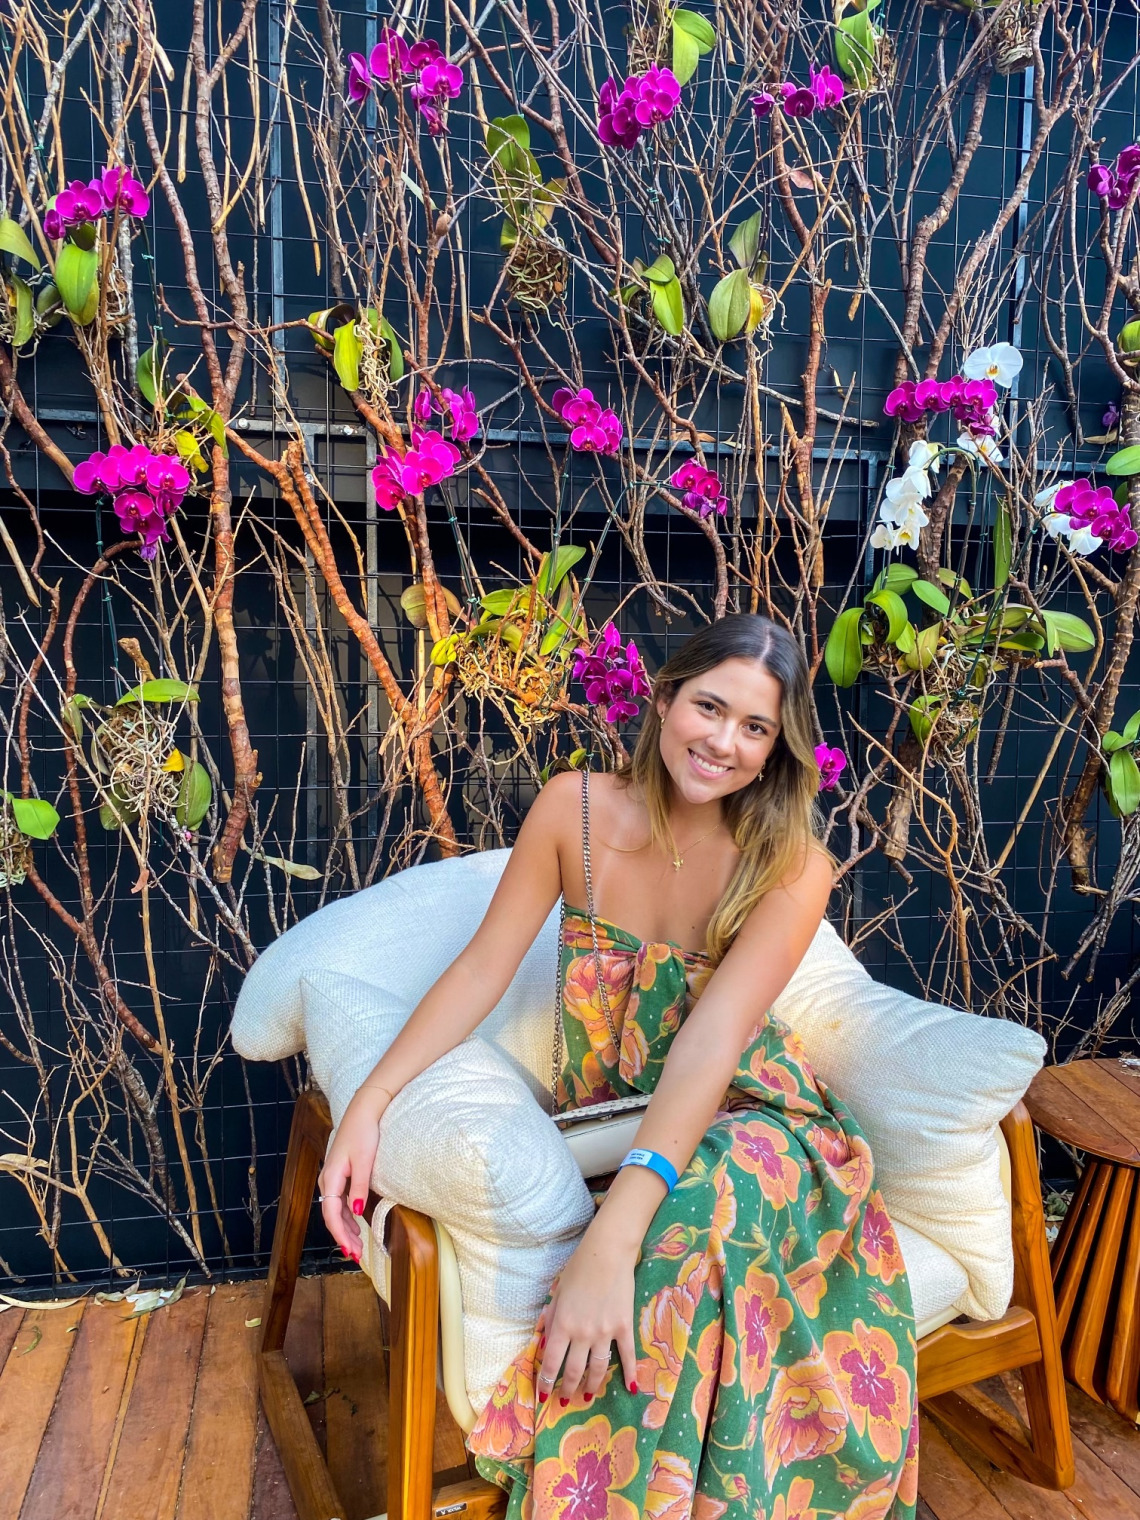 Maria smiling at the camera wearing a floral dress while sitting on a comfy chair. There are pretty vines with flowers in the background.